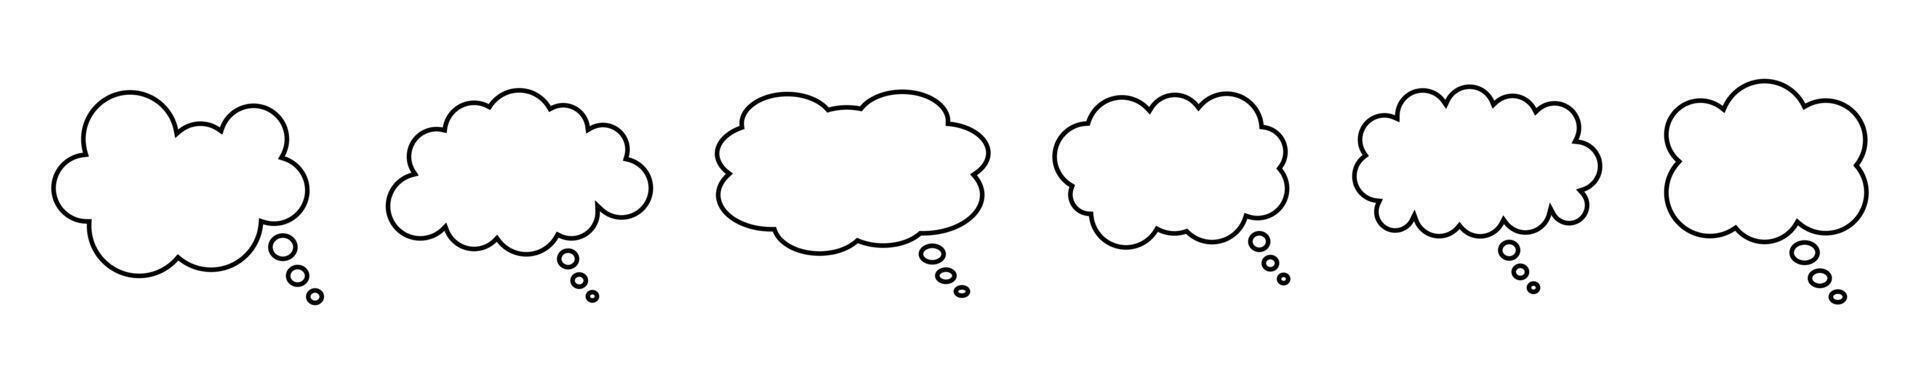 Thought bubble line icon. Speech or think bubble, empty communication cloud. Set of vector design elements. Expanded stroke.